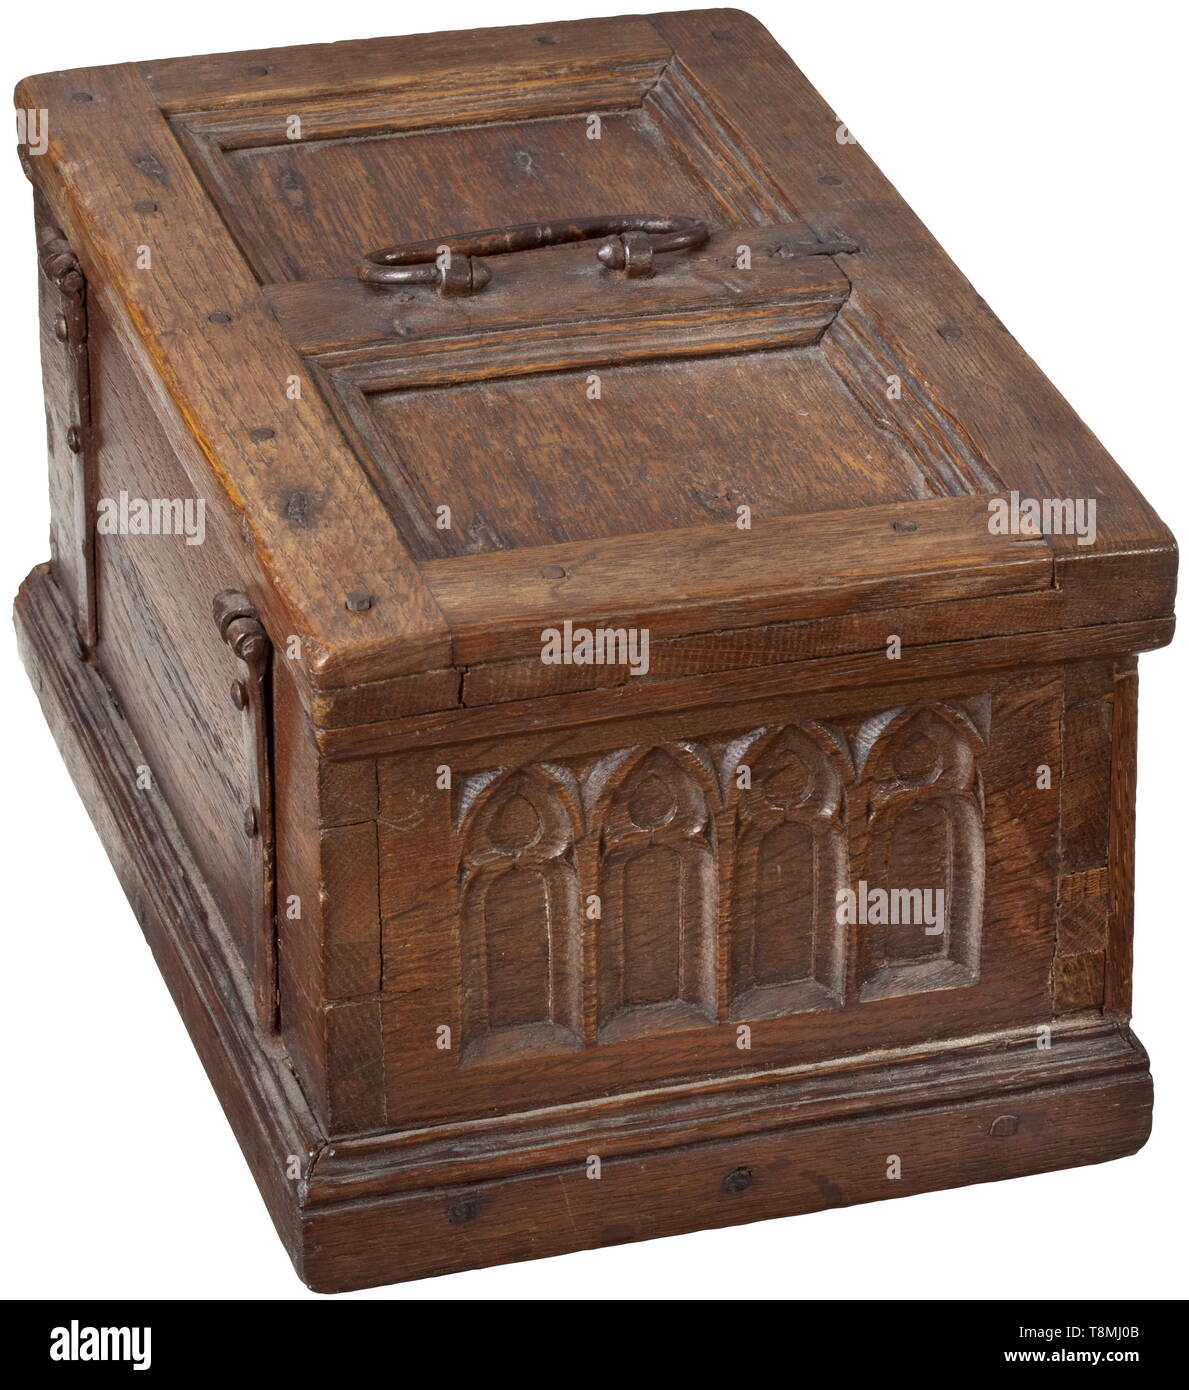 A late Gothic Rhenish casket, circa 1540 Oak wood with fine age patina. Rectangular body in frame construction affixed by wooden pegs. The obverse with two panels featuring finely carved Gothic tracery, the sides with lancet windows and tracery arches. The obverse with key hole and original lock, the key replaced. Hinged lid with original band fittings and iron handle. The base and top part of the back with old additions. Size 14 x 26.5 x 16 cm. historic, historical, handicrafts, handcraft, craft, object, objects, stills, clipping, clippings, cut, Additional-Rights-Clearance-Info-Not-Available Stock Photo